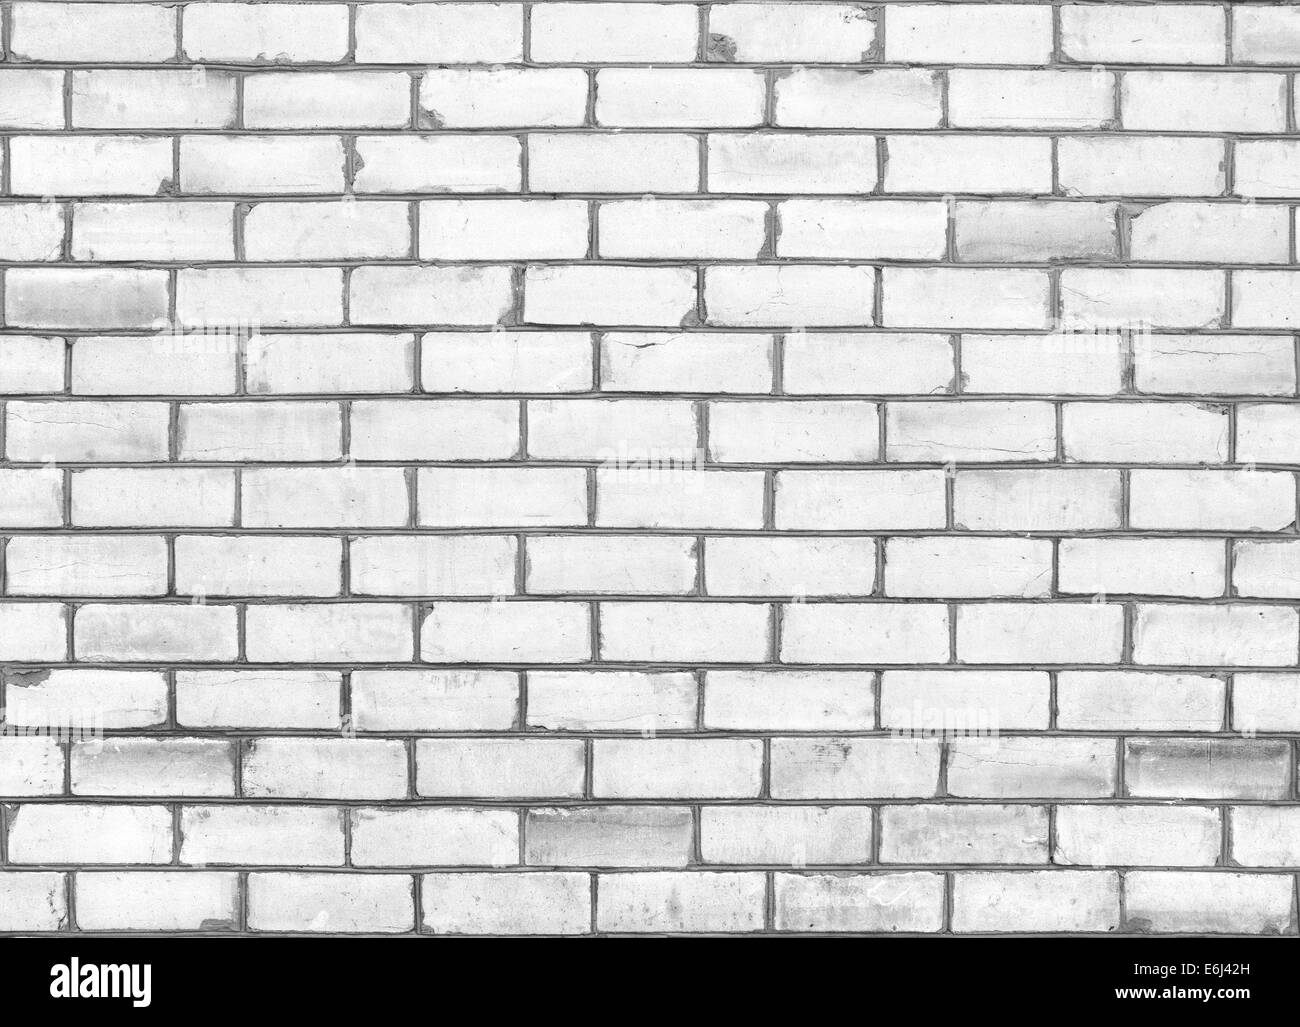 White brick wall background for your design Stock Photo